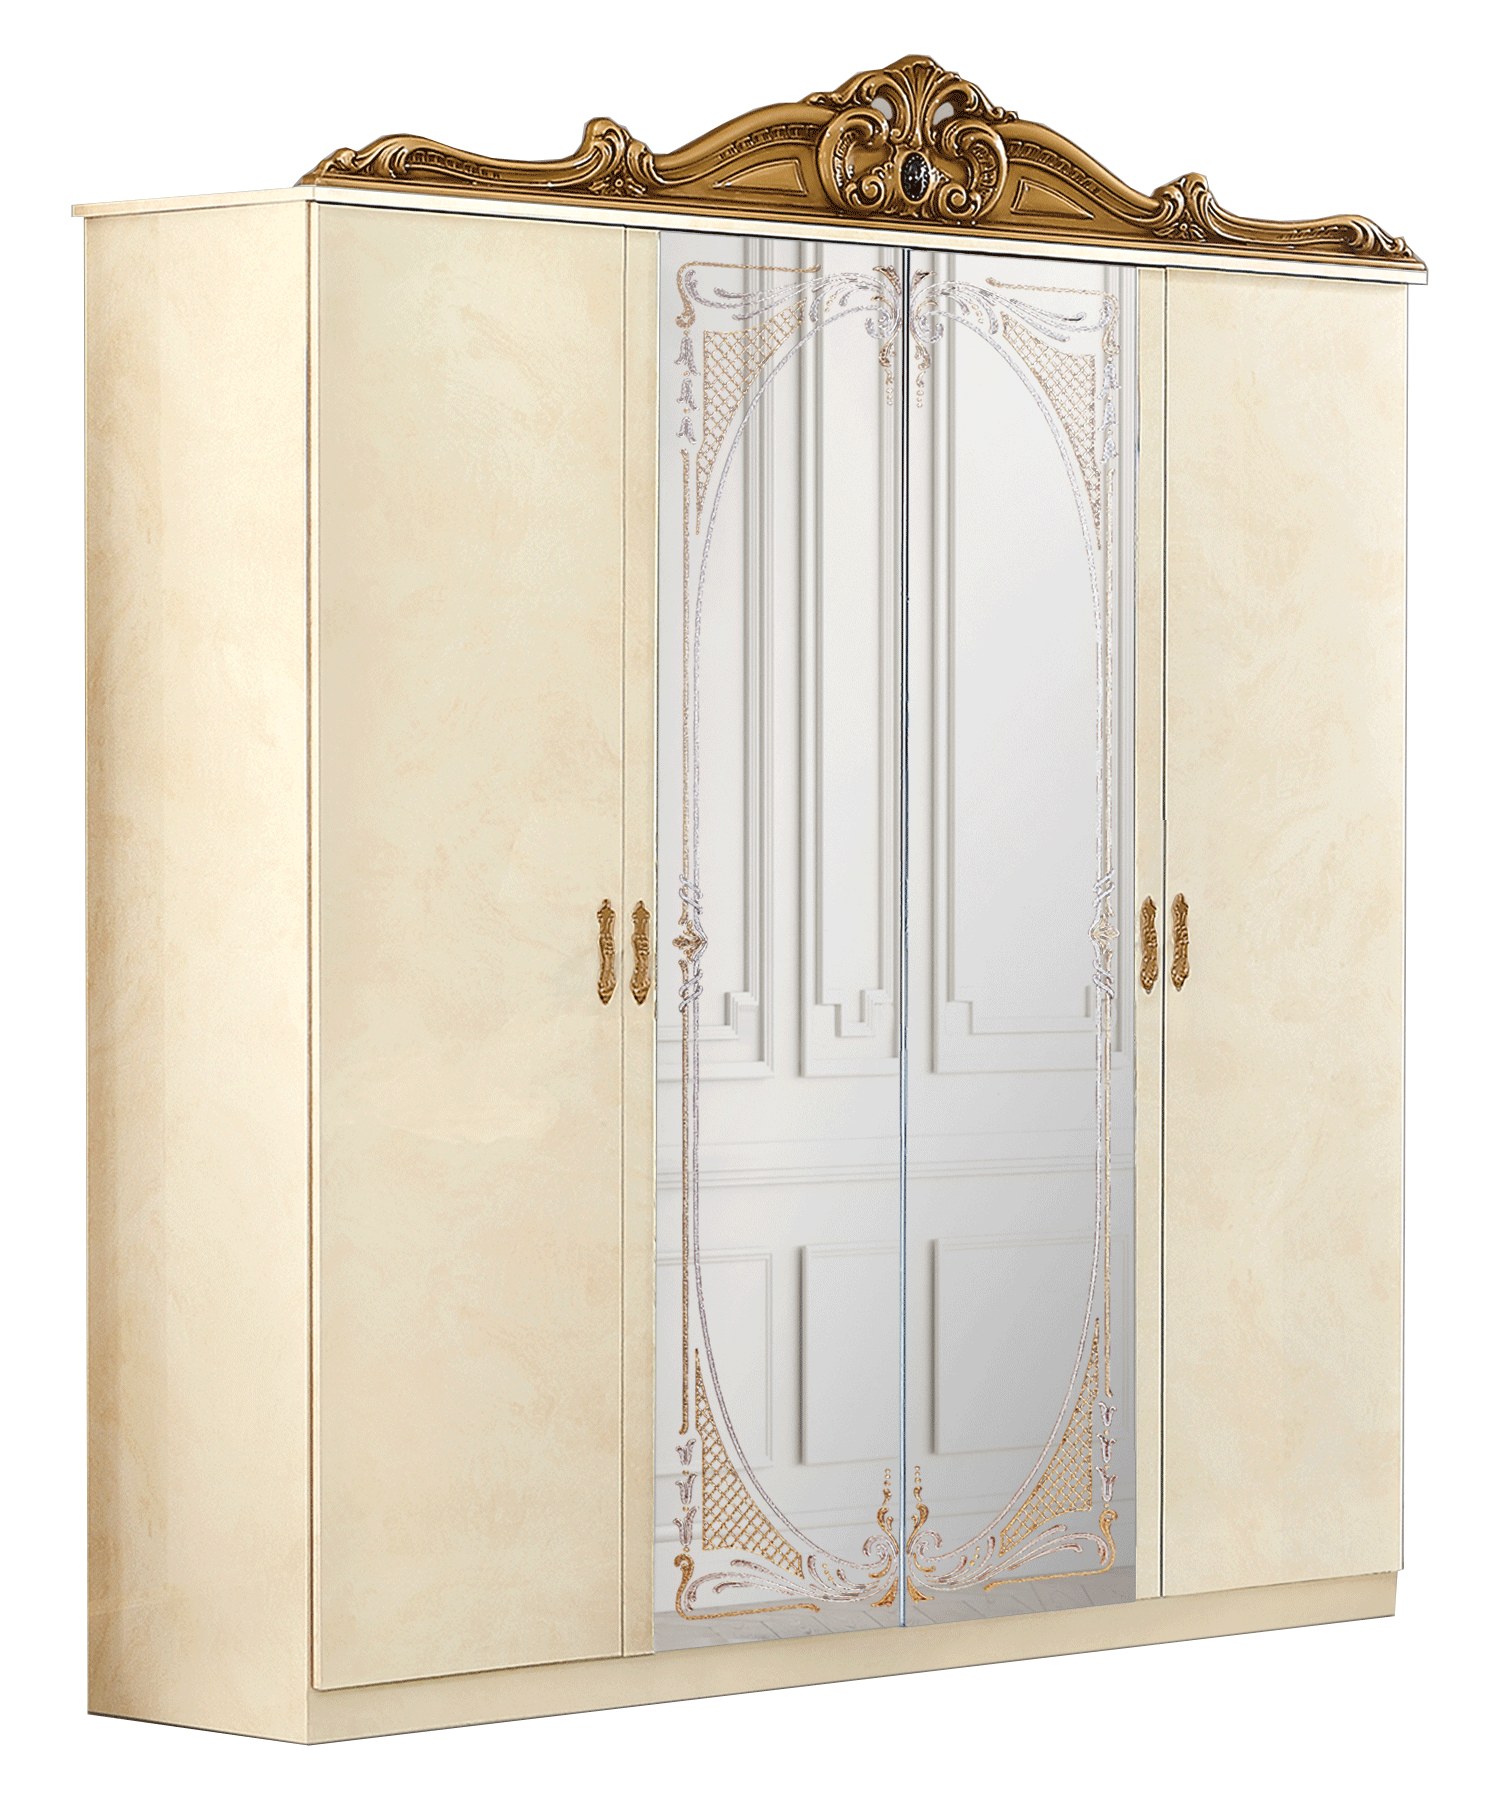 Brands Camel Gold Collection, Italy Barocco Ivory/Gold 4 Door Wardrobe